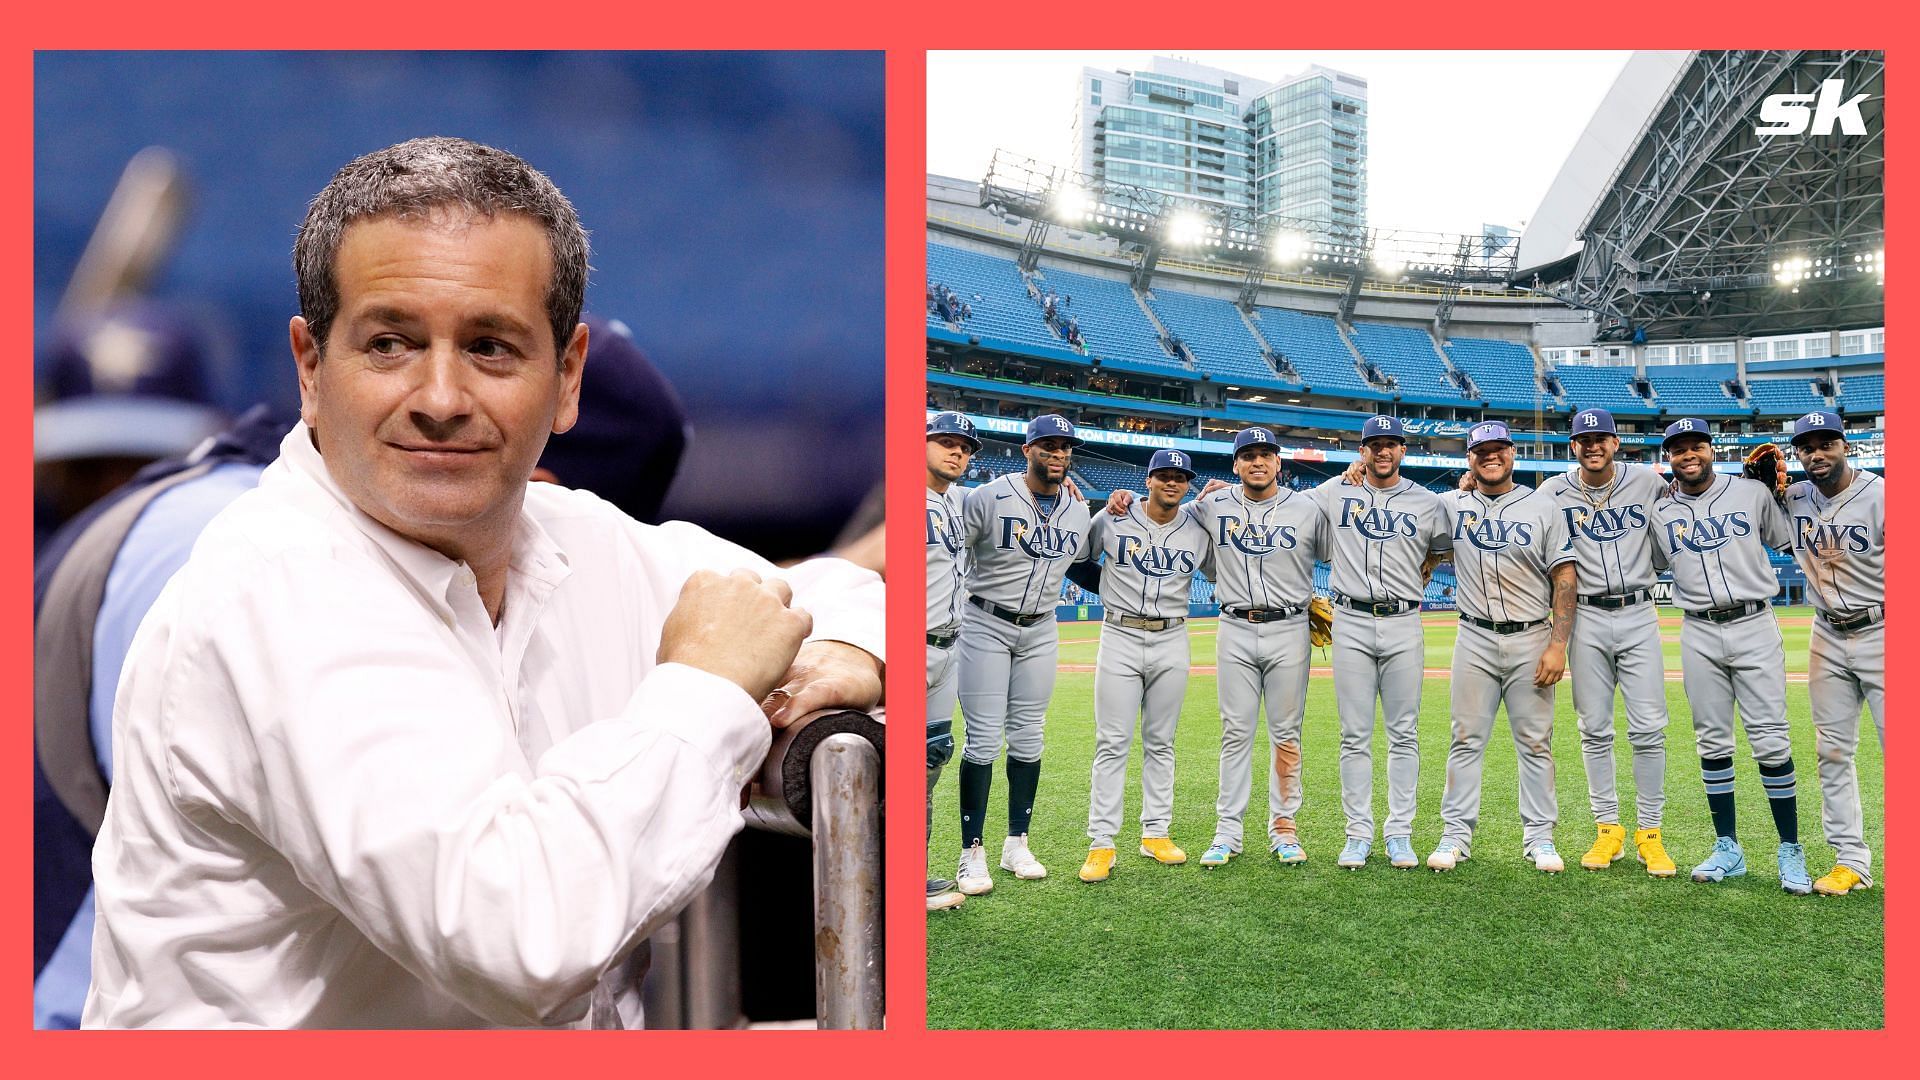 Tampa Bay Rays owner Stuart Sternberg reaffirms commitment to team